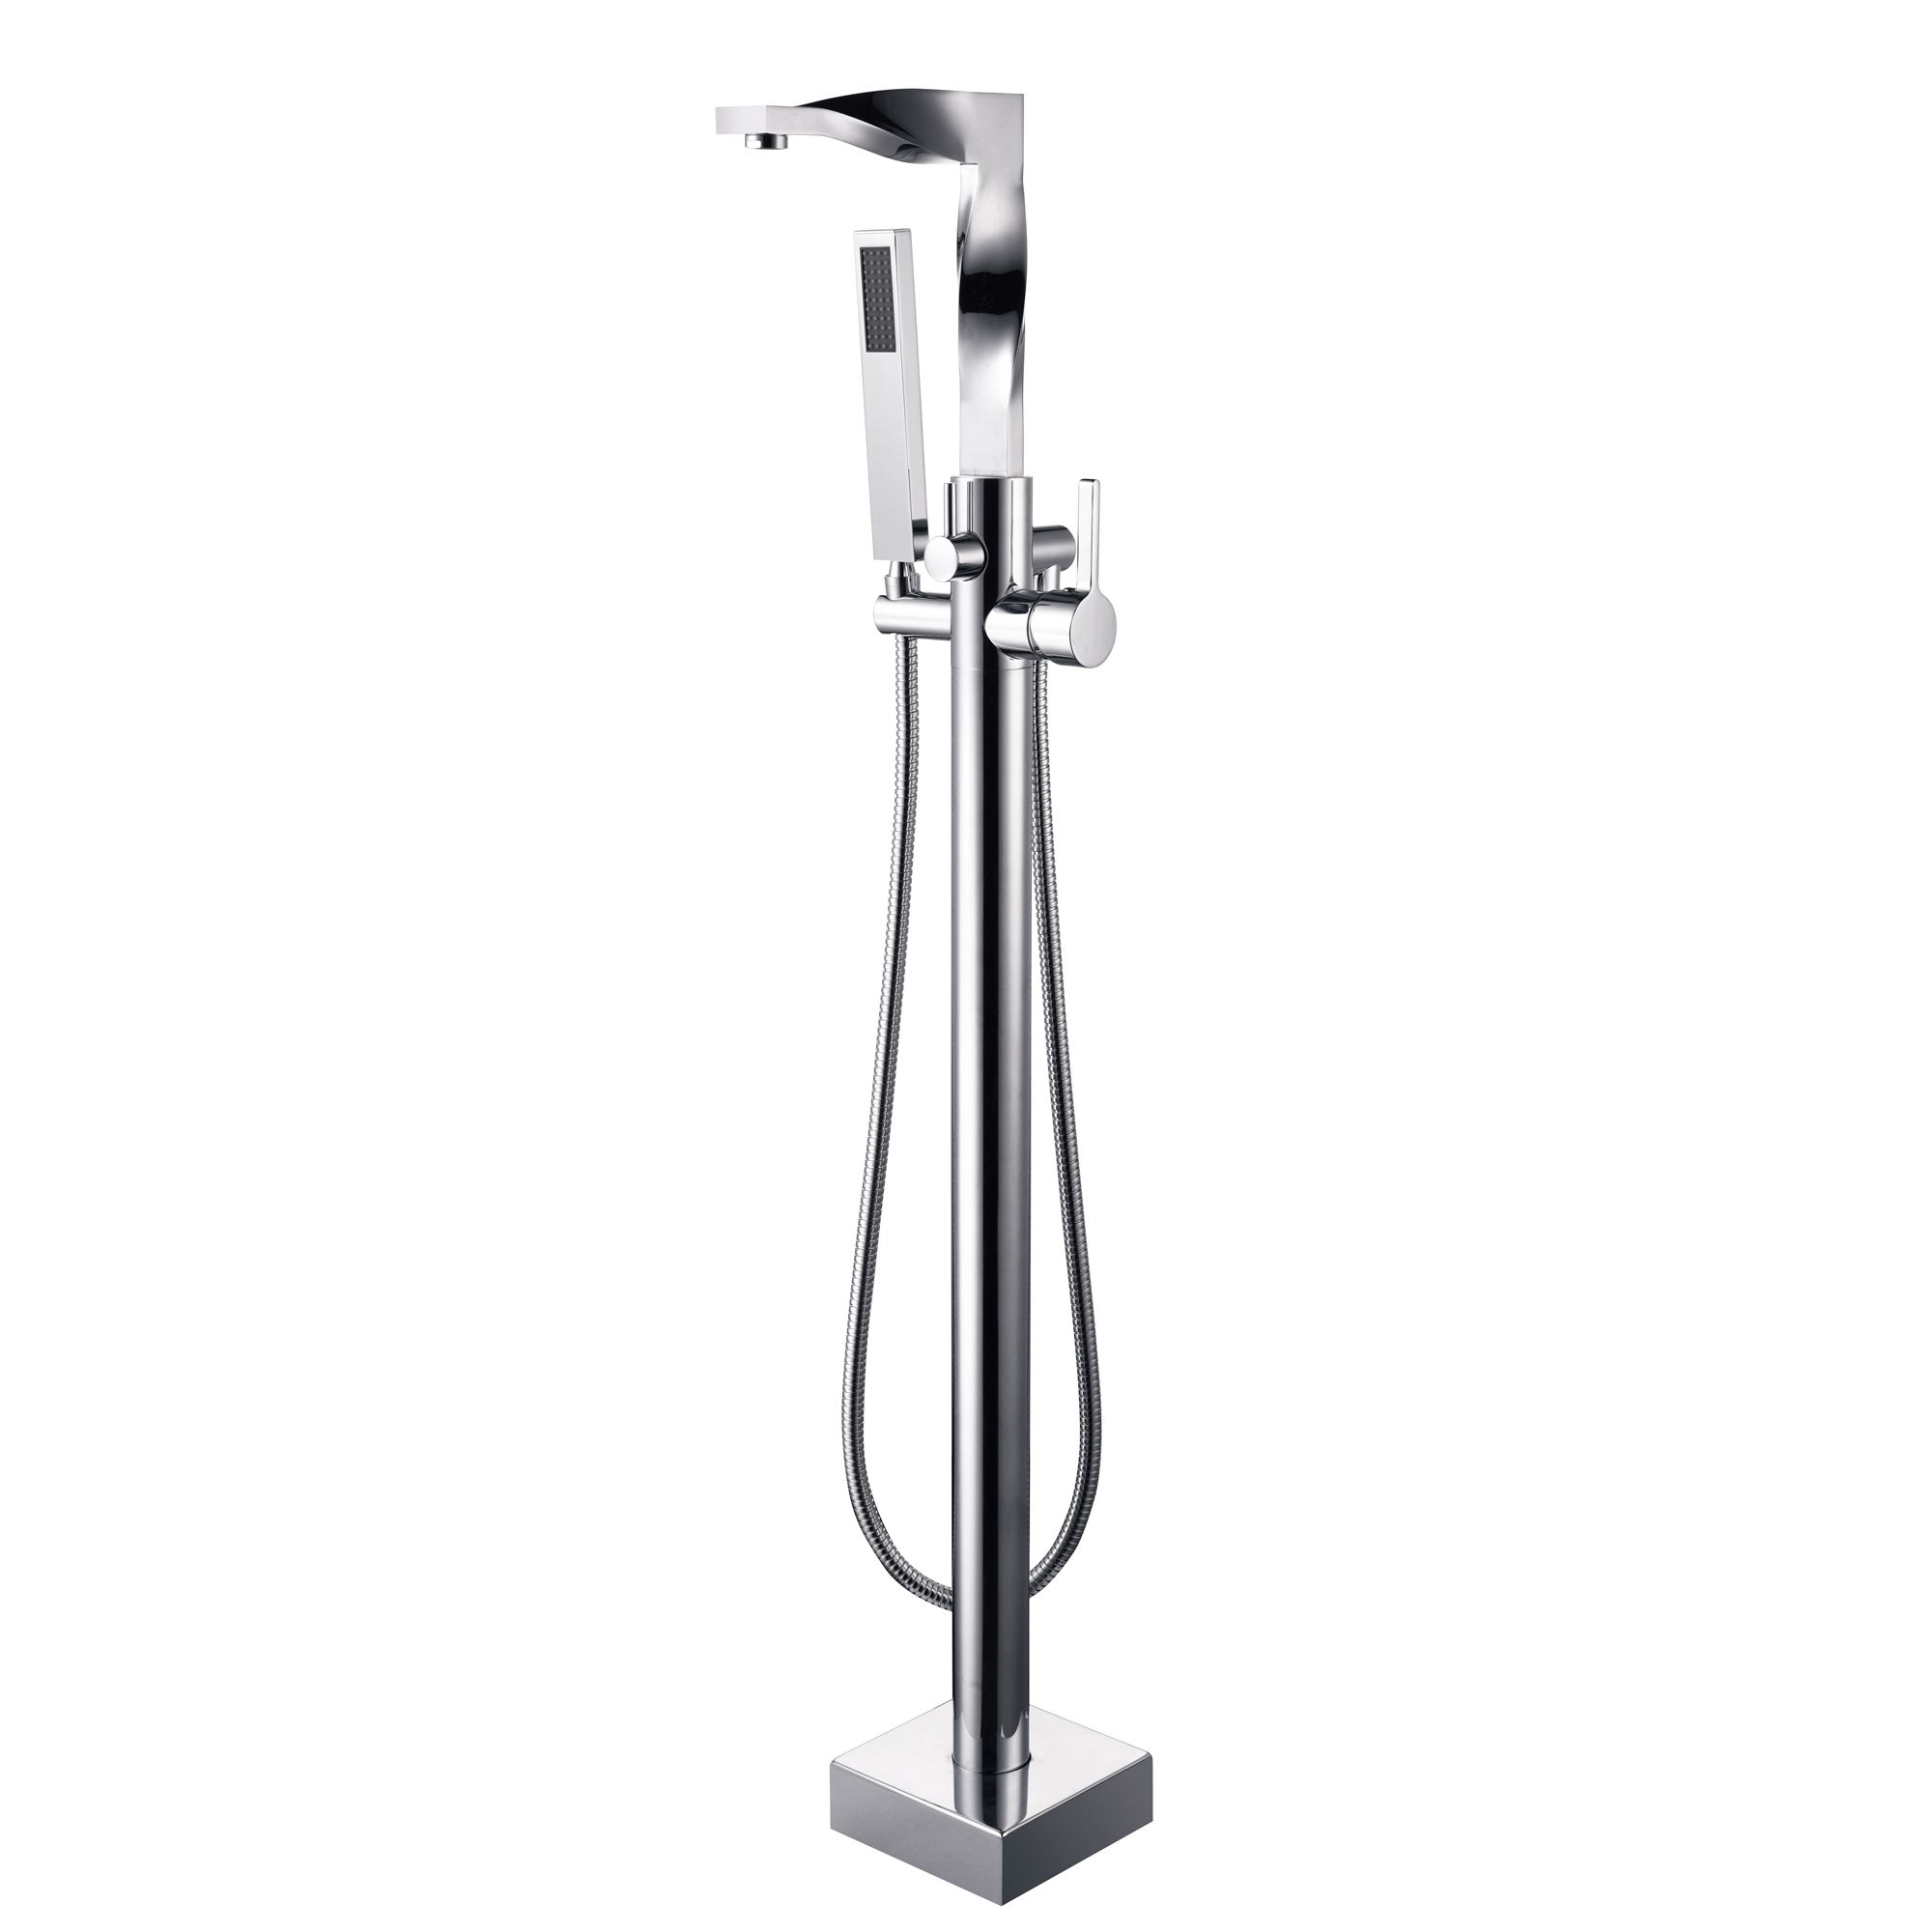 Floormounted Shower Faucet For Bathtub Separately Floor Mounted Freestanding Luxury Set Mixer Faucets Standing Chrome Tap